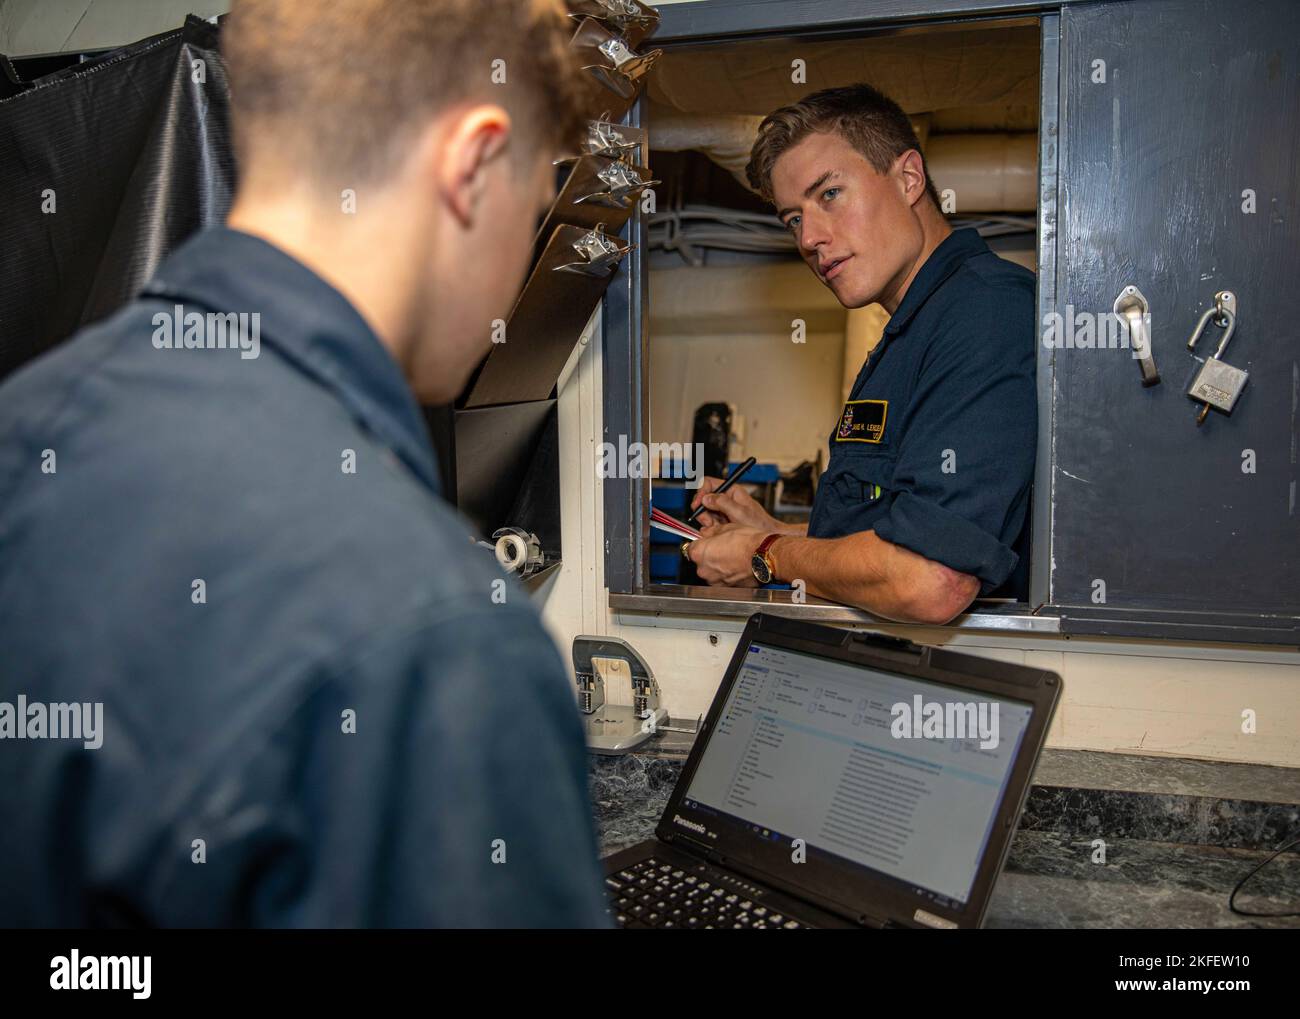 PHILIPPINE SEA (Sept. 13, 2022) Personnel Specialist Seaman Cameron Stine, left, from Ft. Worth, Texas, and Lt. j.g. James Lendon, from Delmar, New York, conduct administrative work aboard Ticonderoga-class guided-missile cruiser USS Chancellorsville (CG 62) in the Philippine Sea on Sept. 13, 2022. Chancellorsville is forward-deployed to the U.S. 7th Fleet in support of security and stability in the Indo-Pacific and is assigned to Commander, Task Force 70, a combat-ready force that protects and defends the collective maritime interest of its allies and partners in the region. Stock Photo